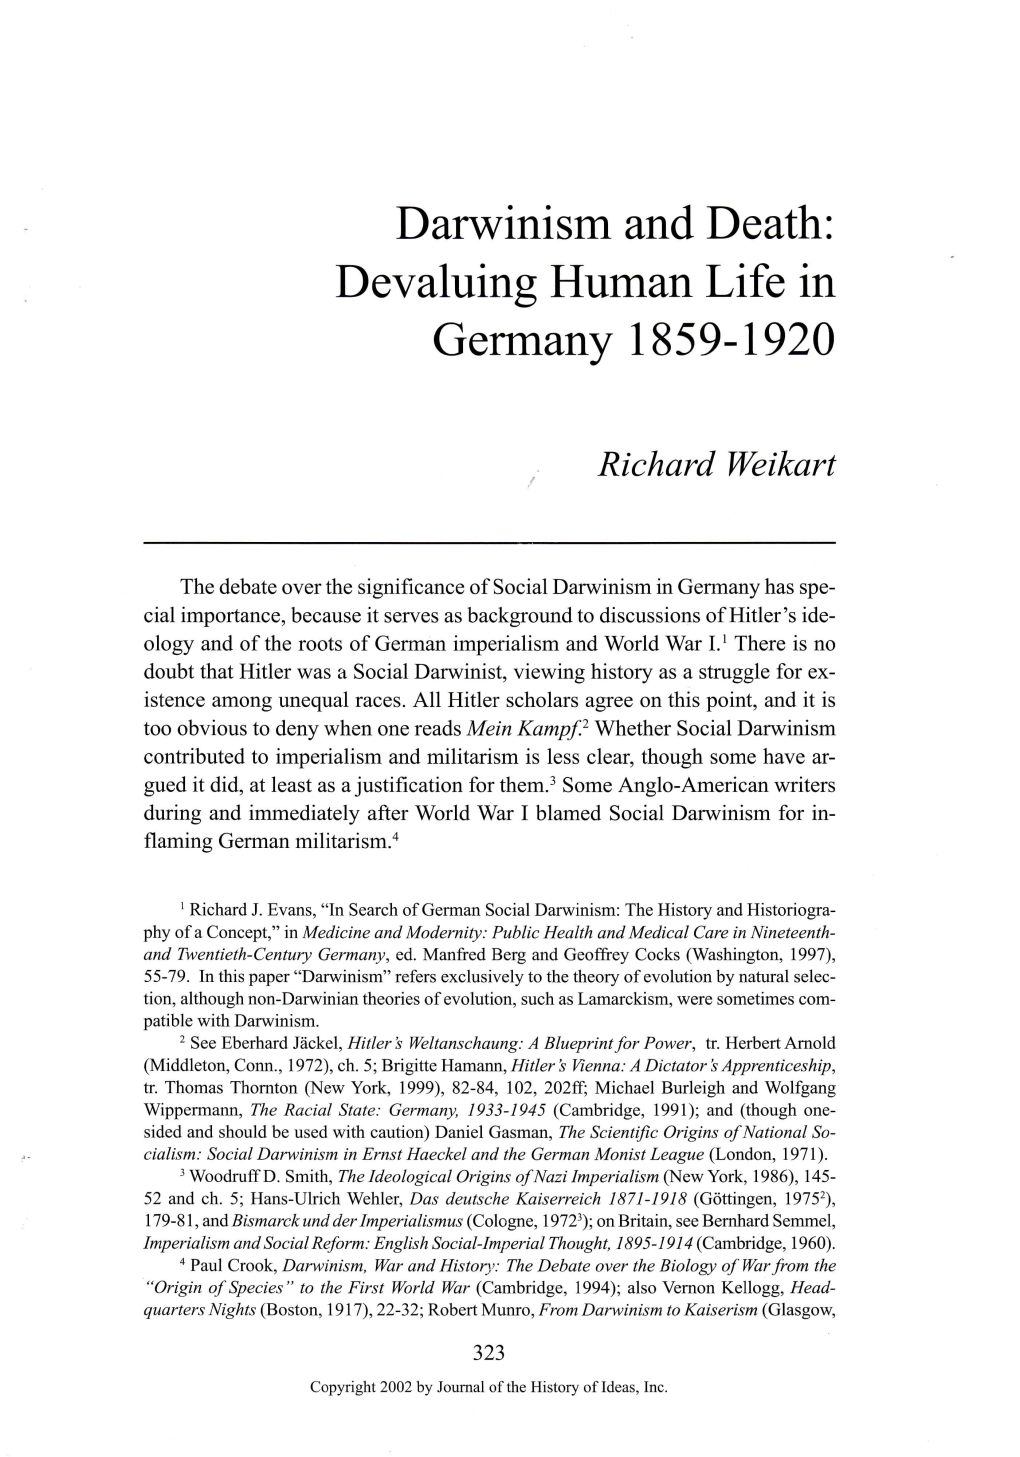 Darwinism and Death: Devaluing Human Life in Germany 1859-1920